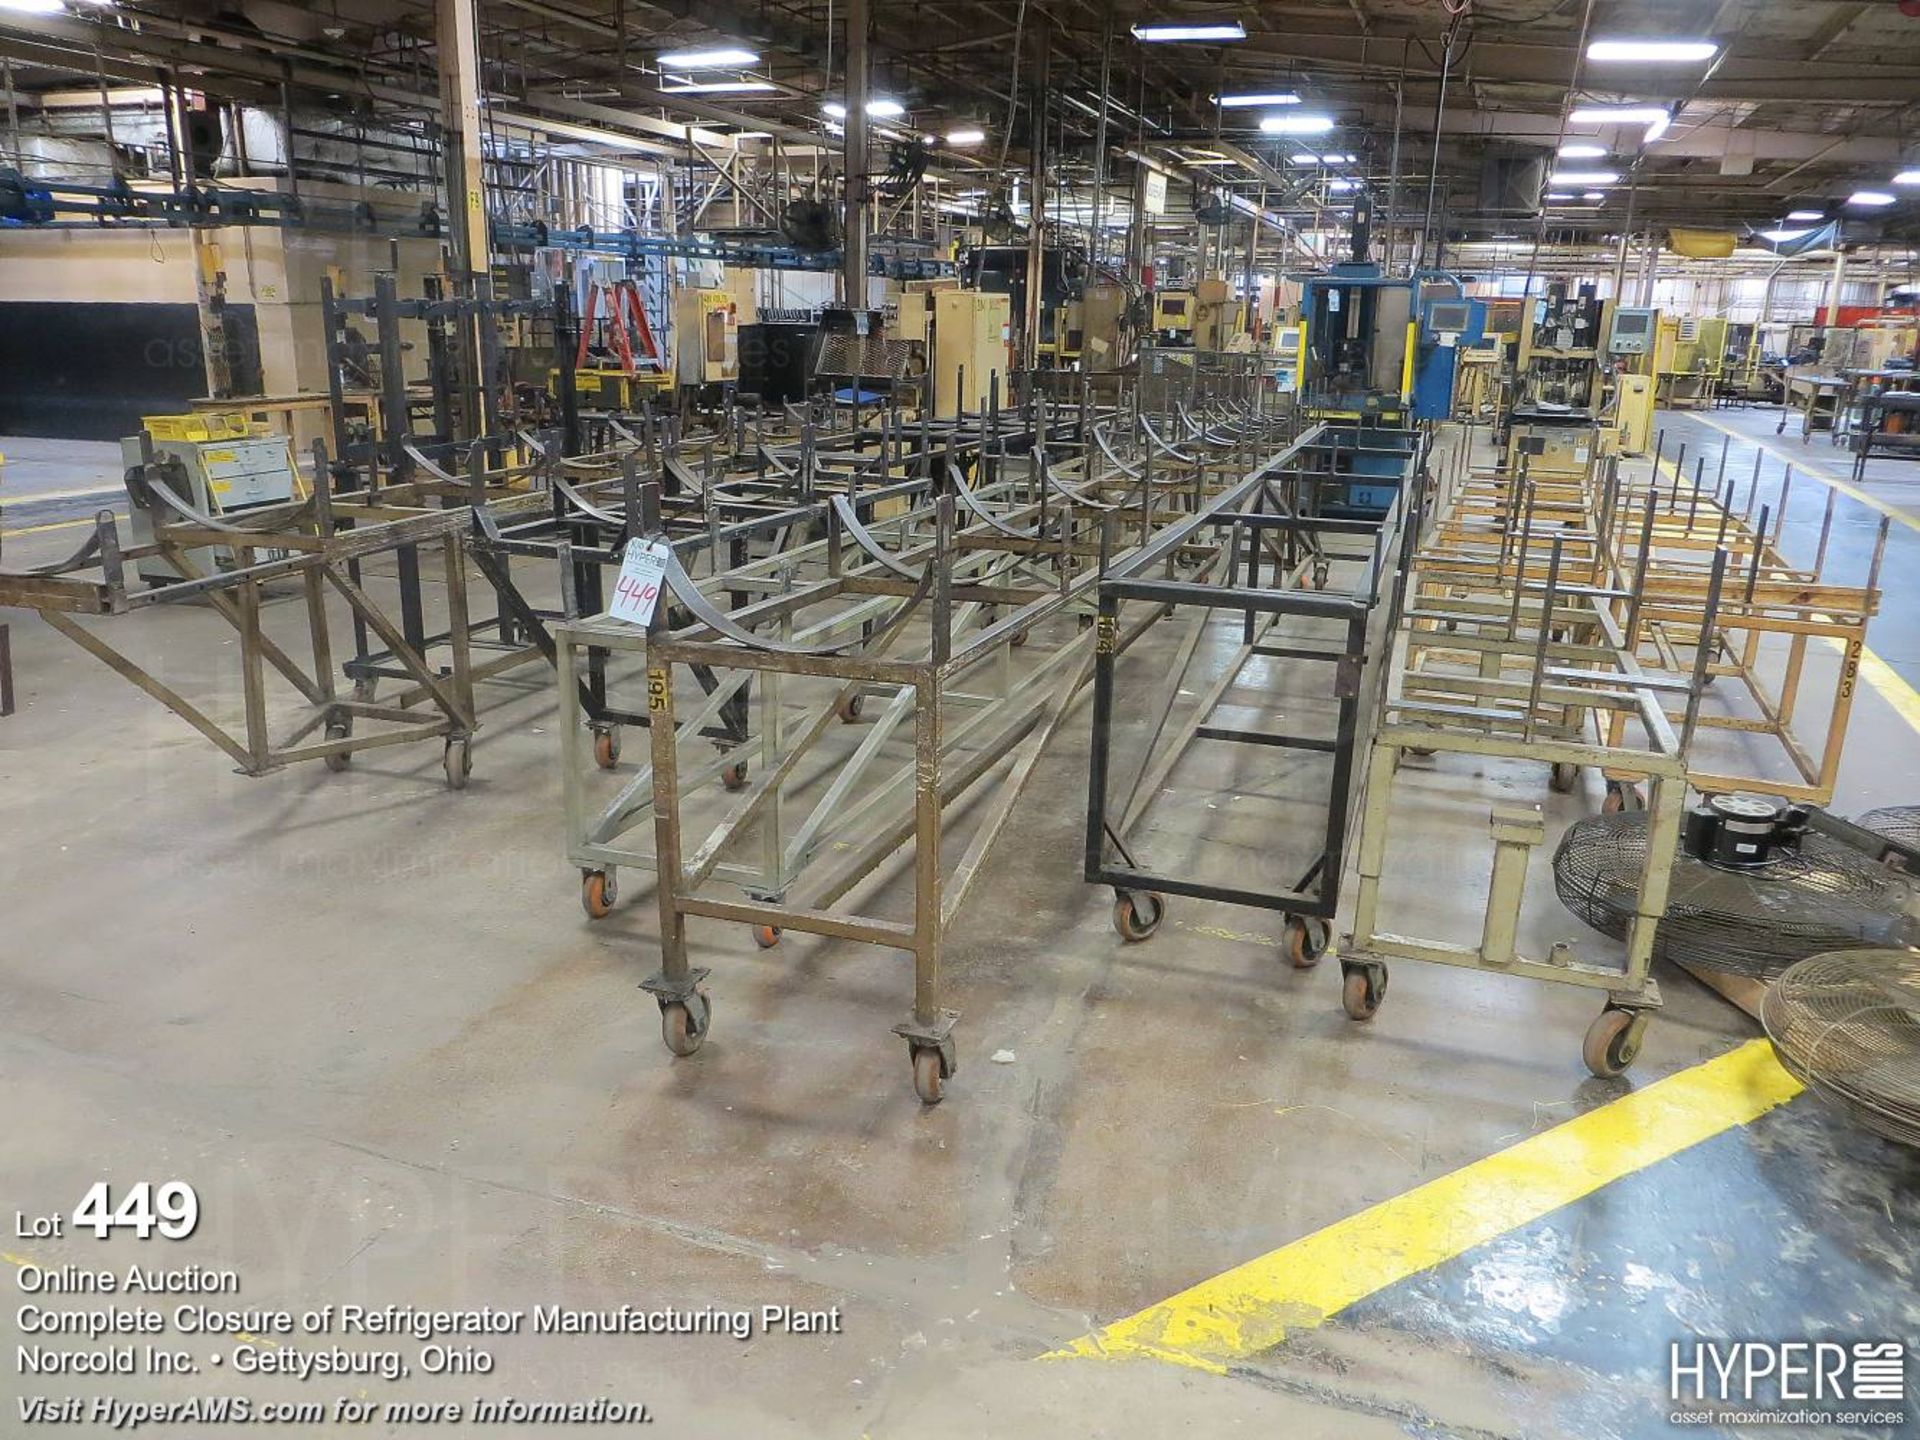 (10) steel stock carts various lengths 7'-18'